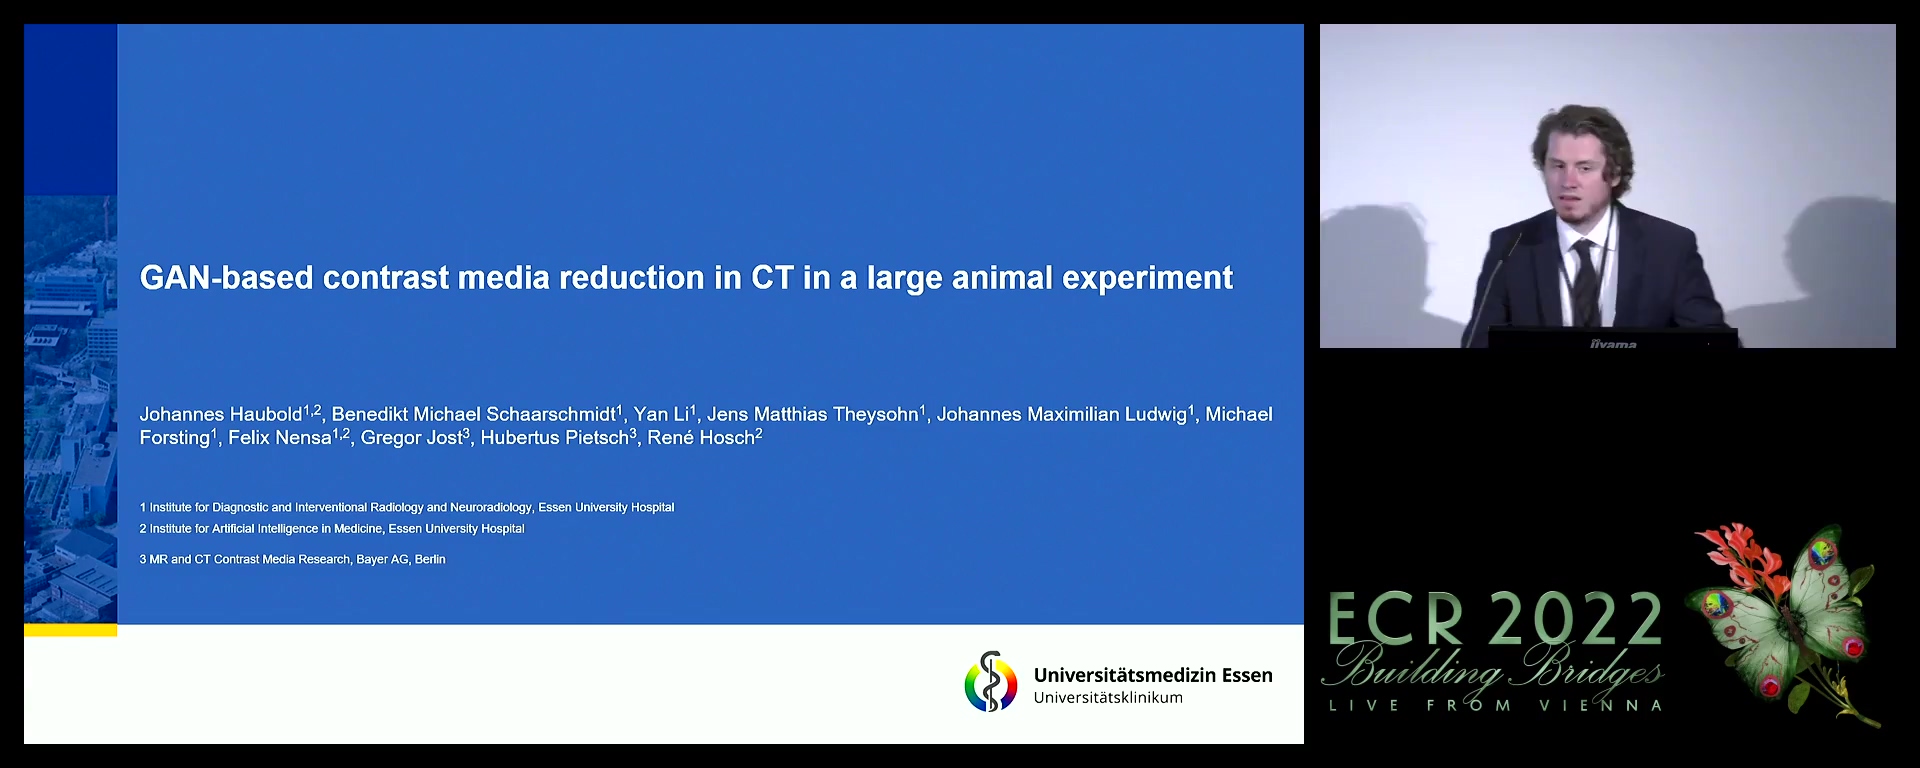 Contrast media reduction in CT with deep learning utilising a generative adversarial network in an experimental animal study